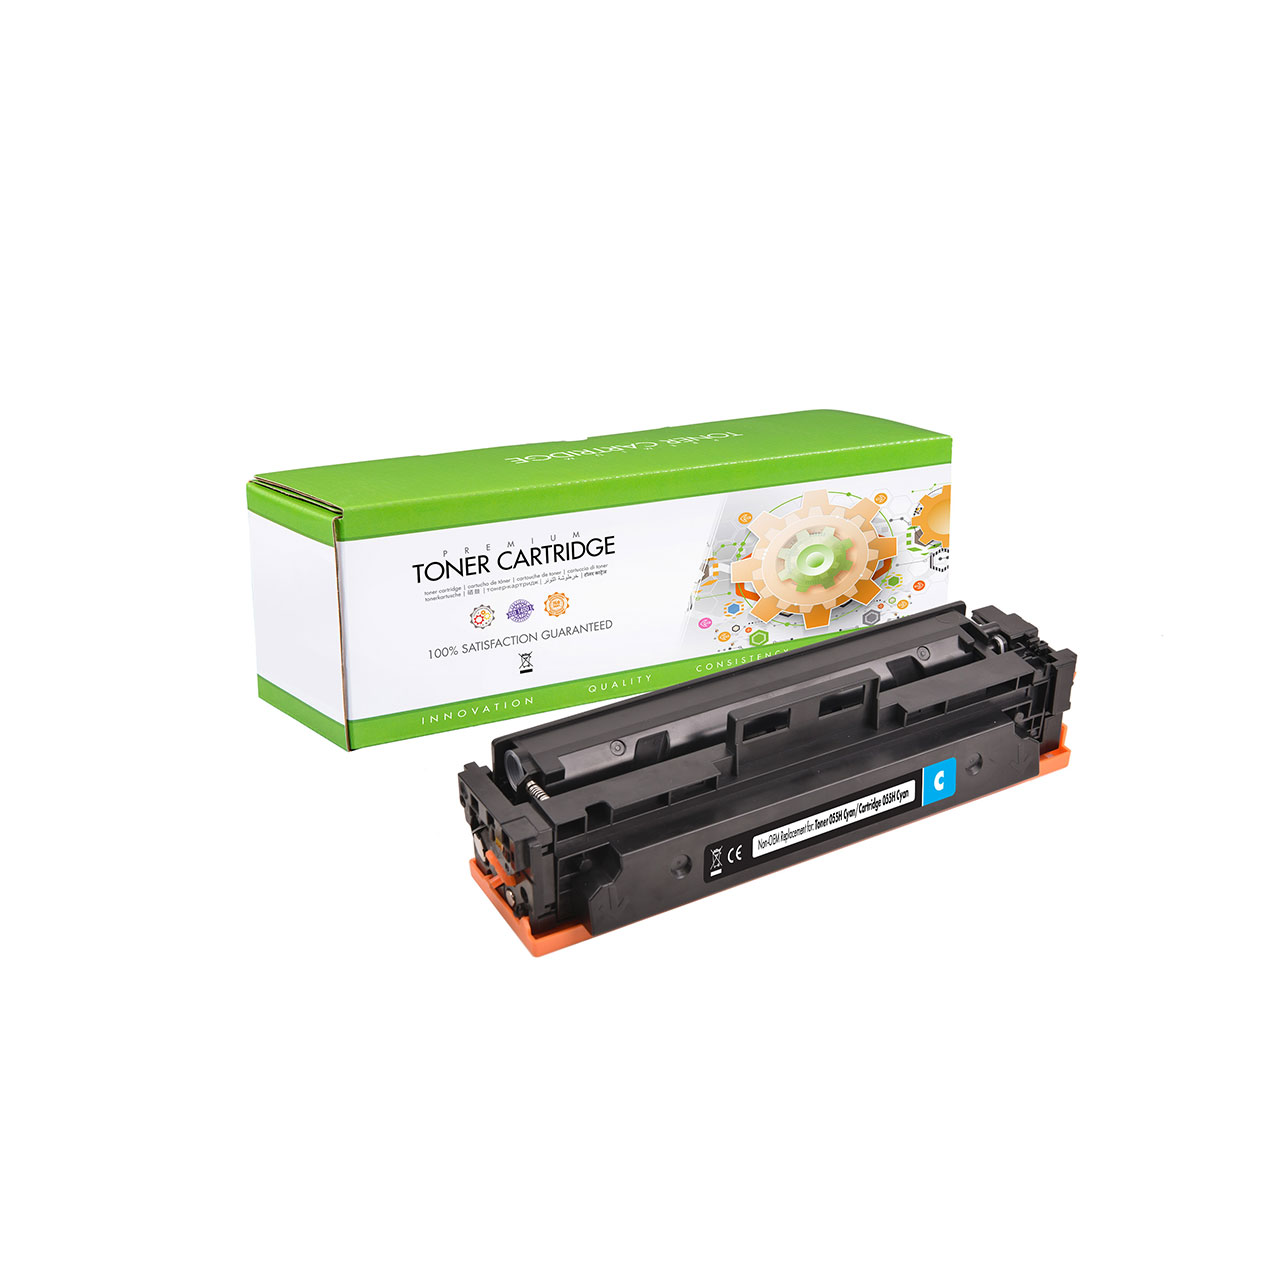 Static Control® toner cartridge replacement for Canon 055H Cyan